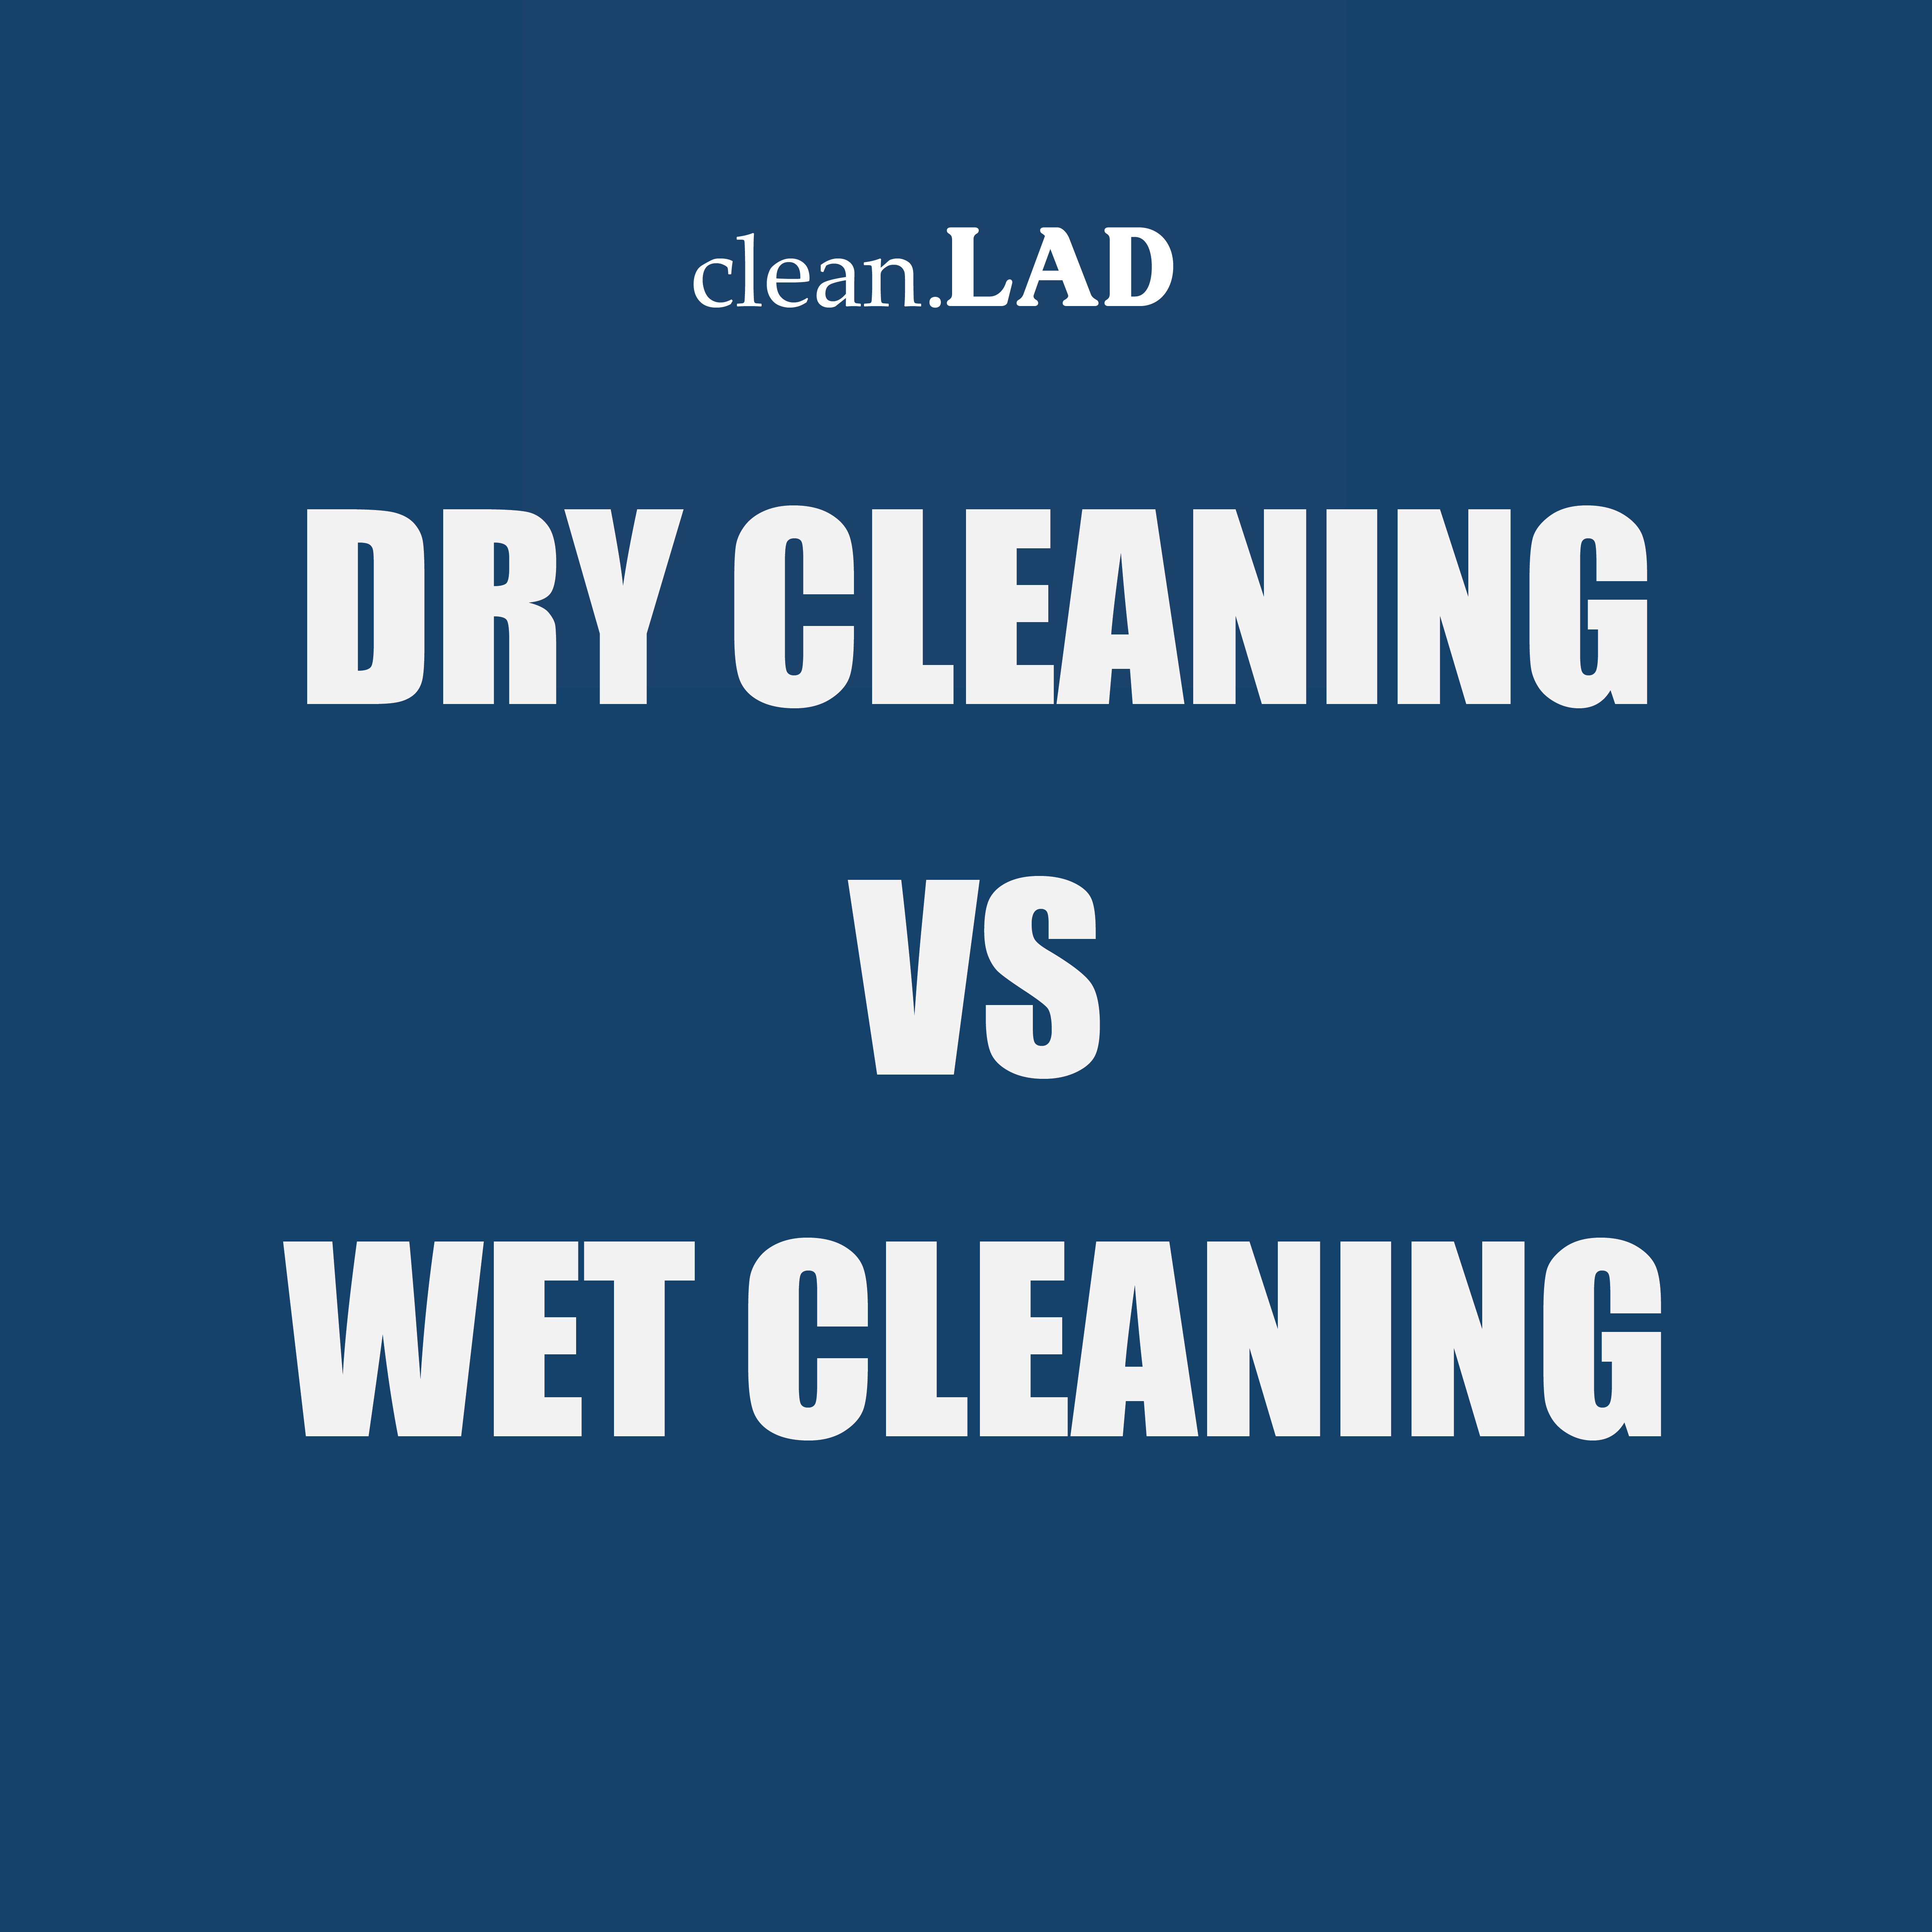 Dry vs wet cleaning